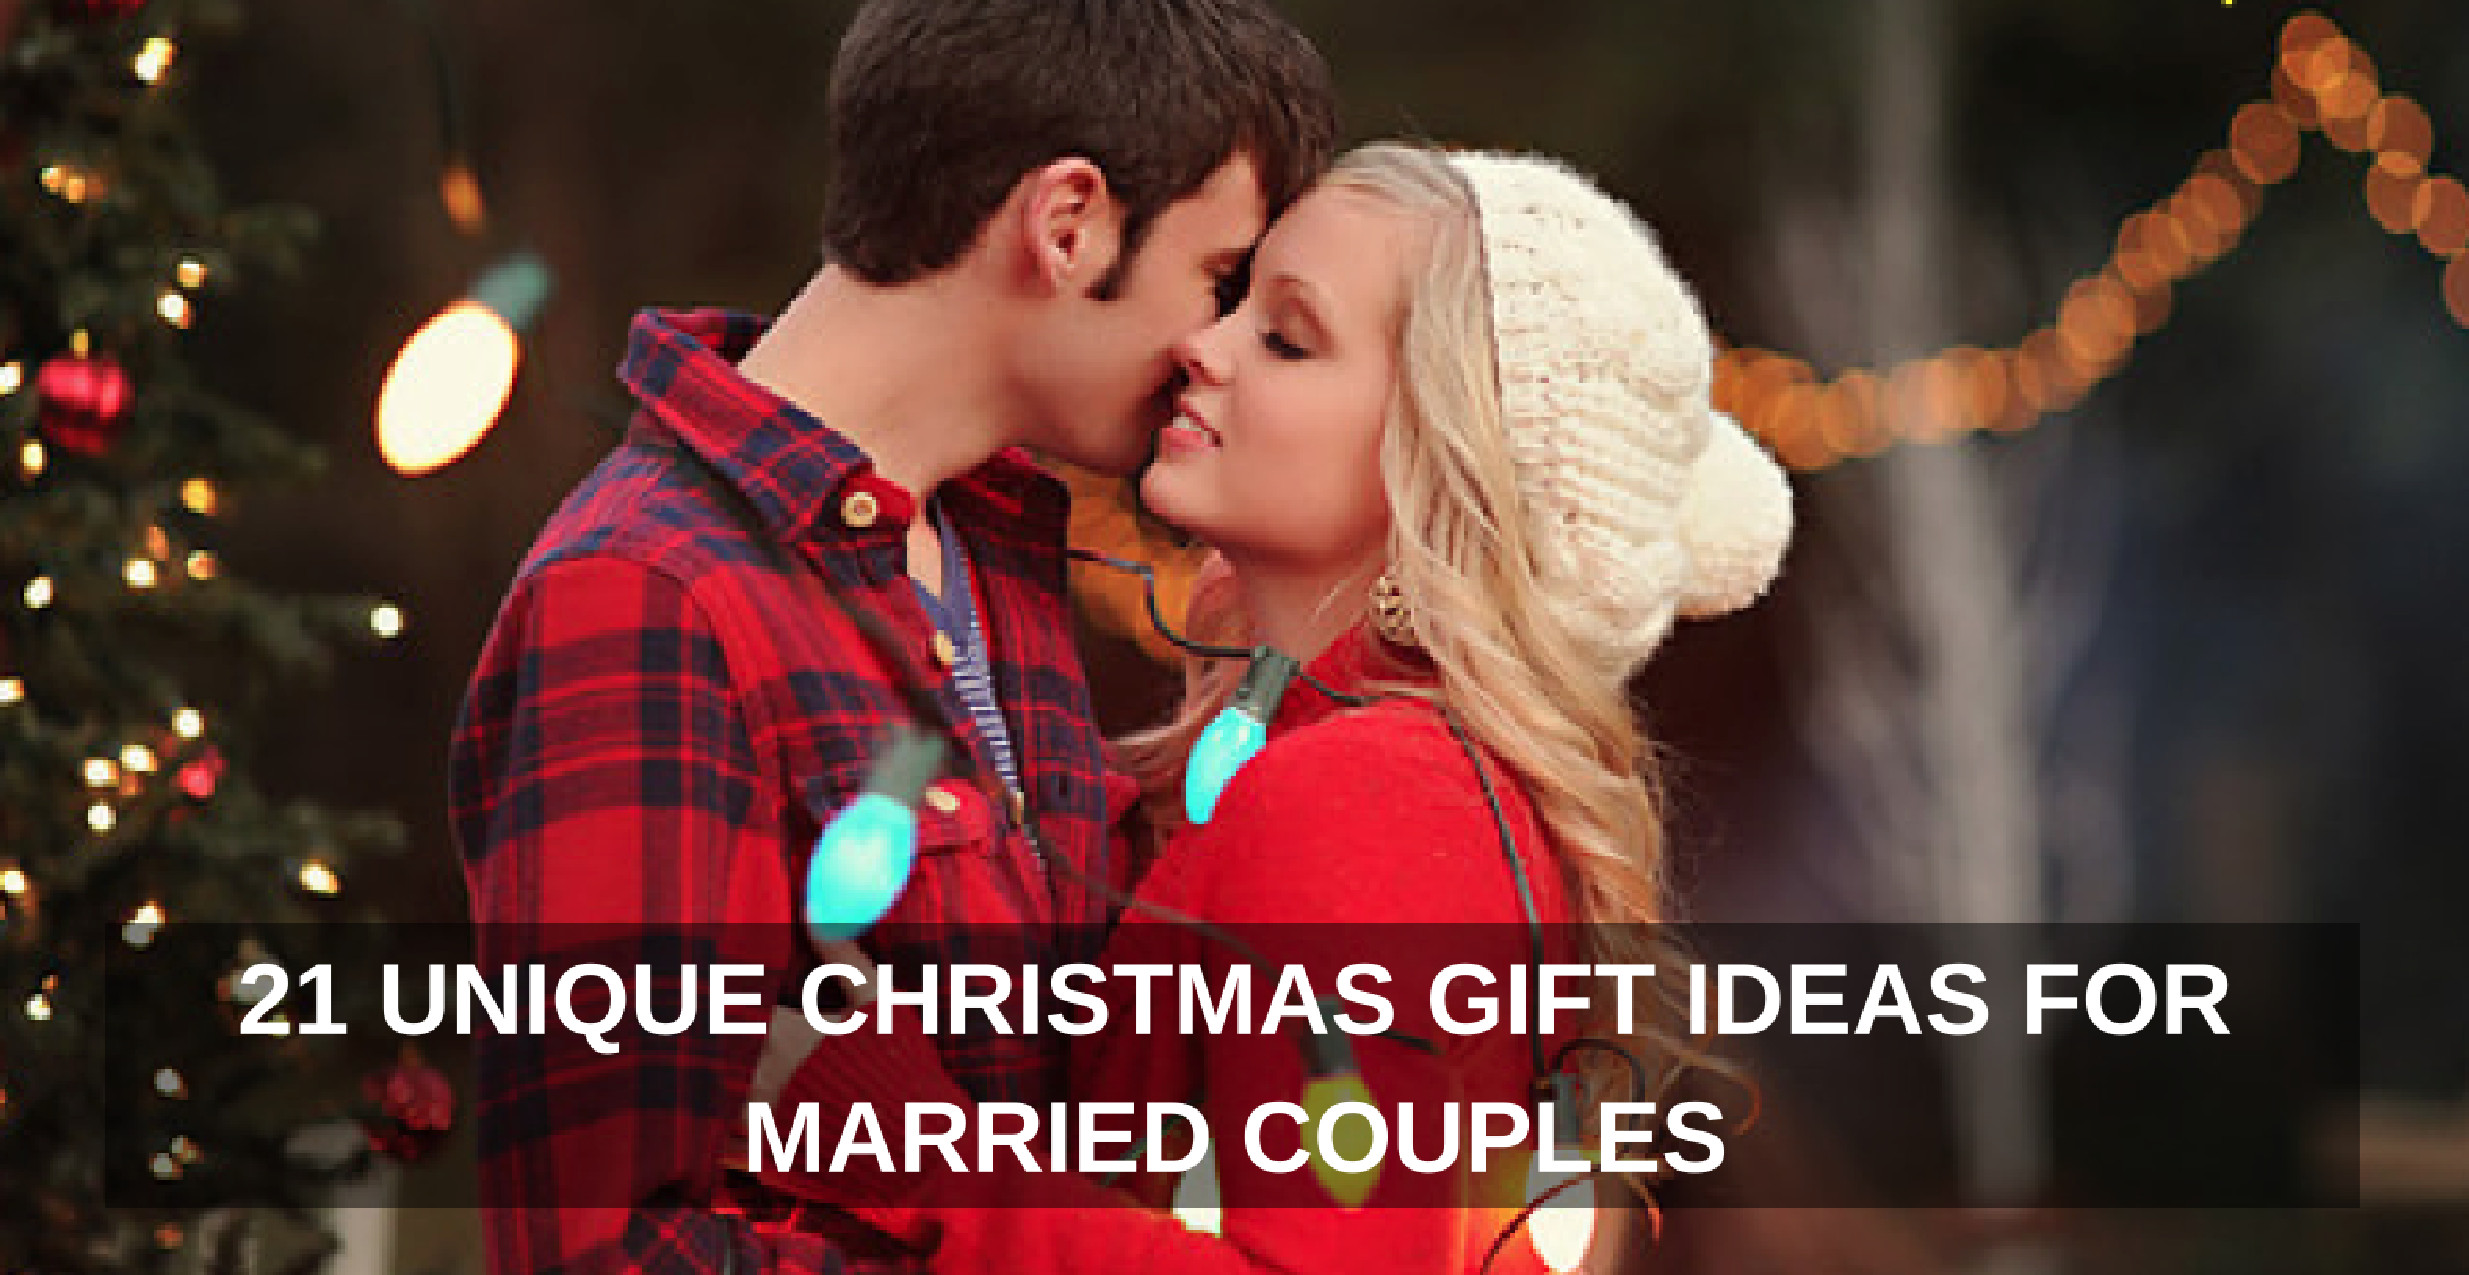 Couple Gift Ideas For Christmas
 21 Unique Christmas Gift Ideas for Married Couples